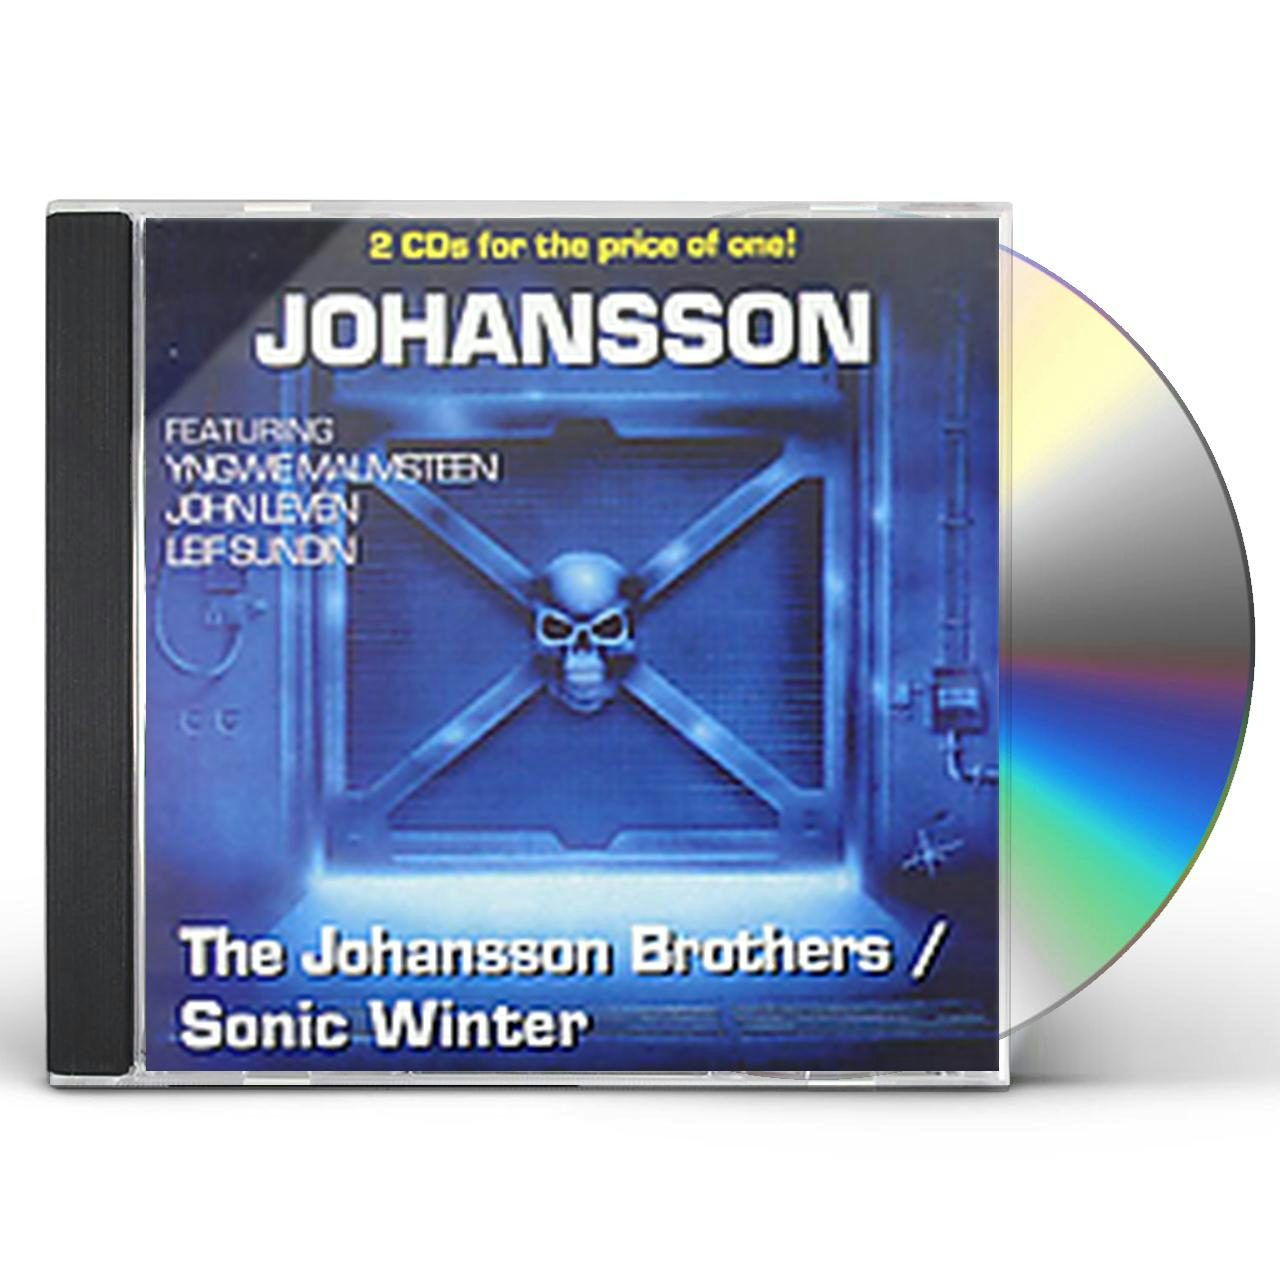 j:son brothers / sonic winter cd